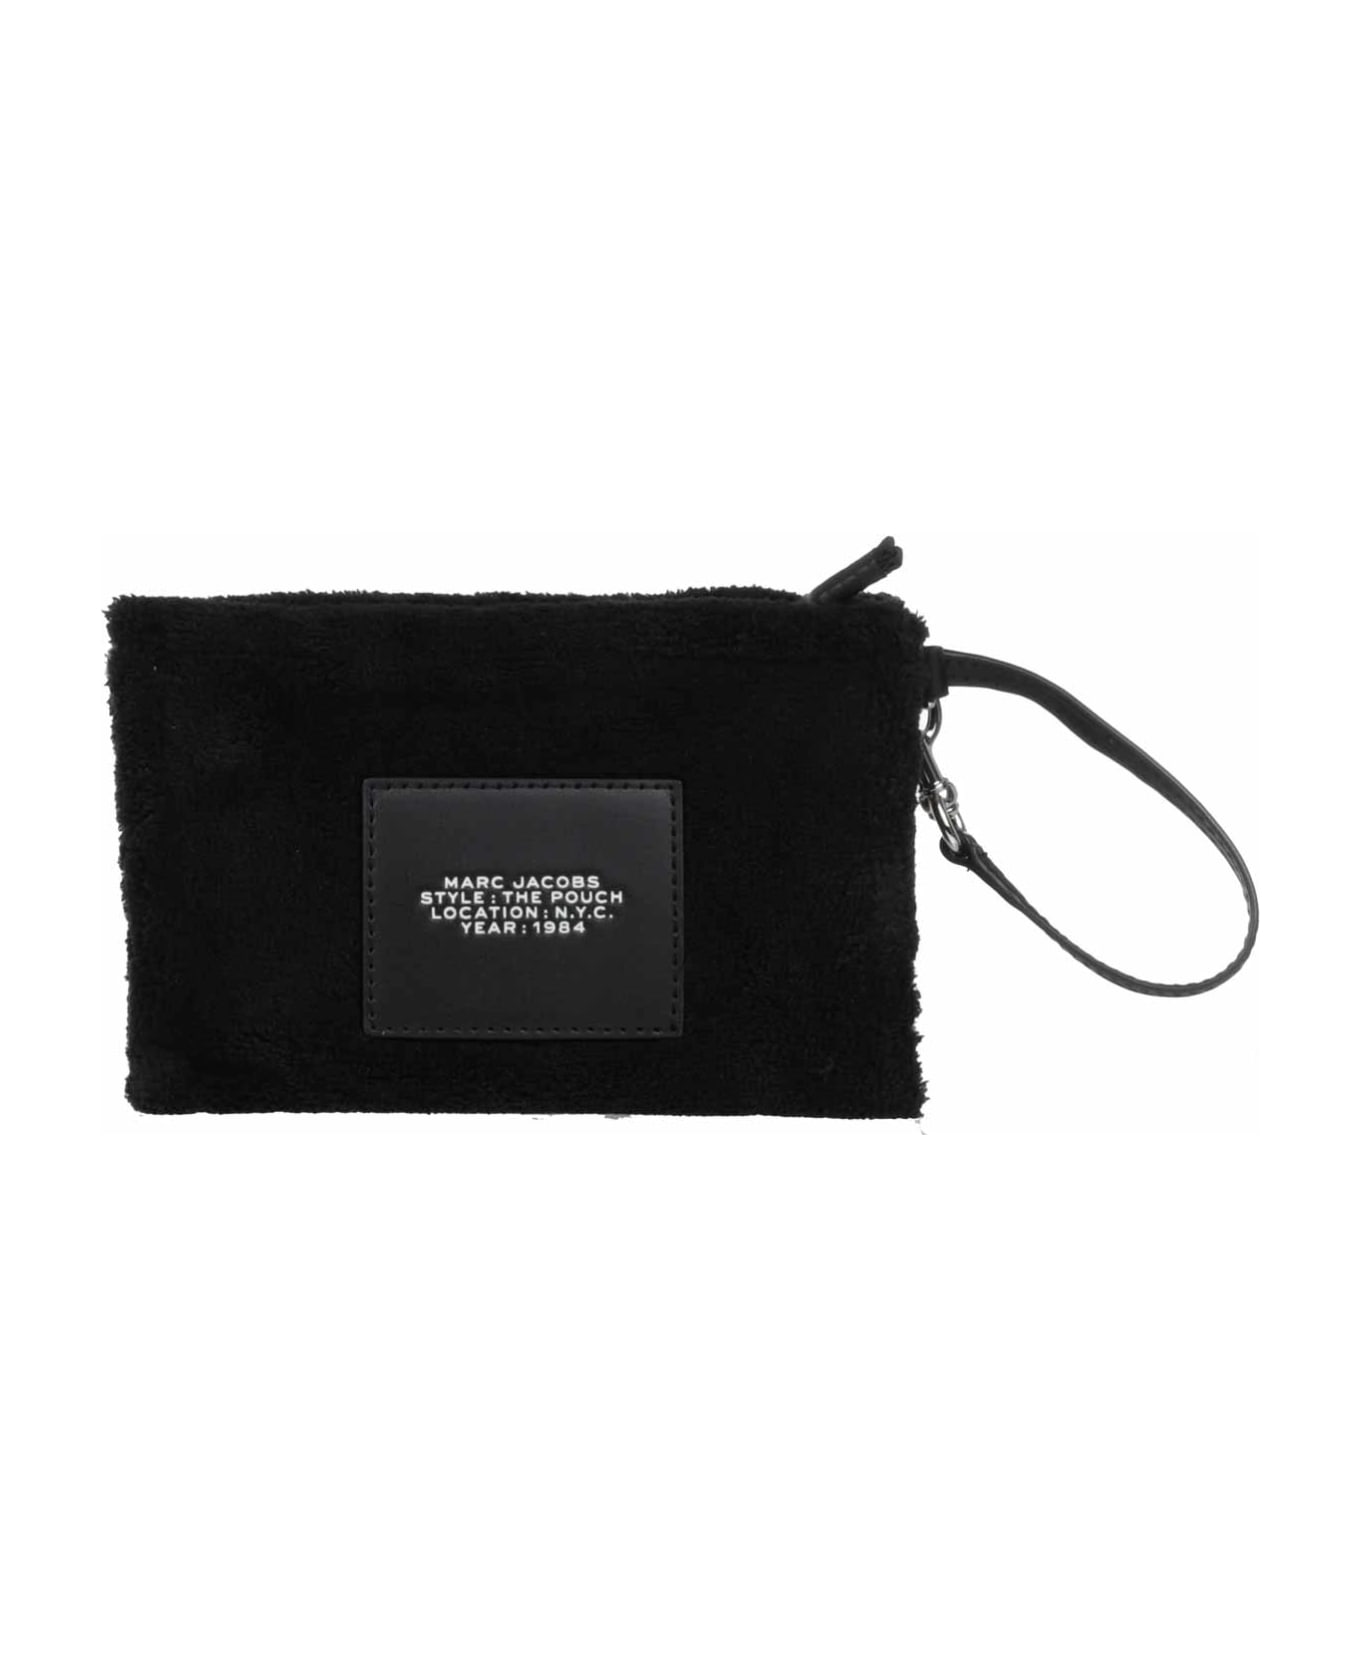 Marc Jacobs Black Terry Pouch | italist